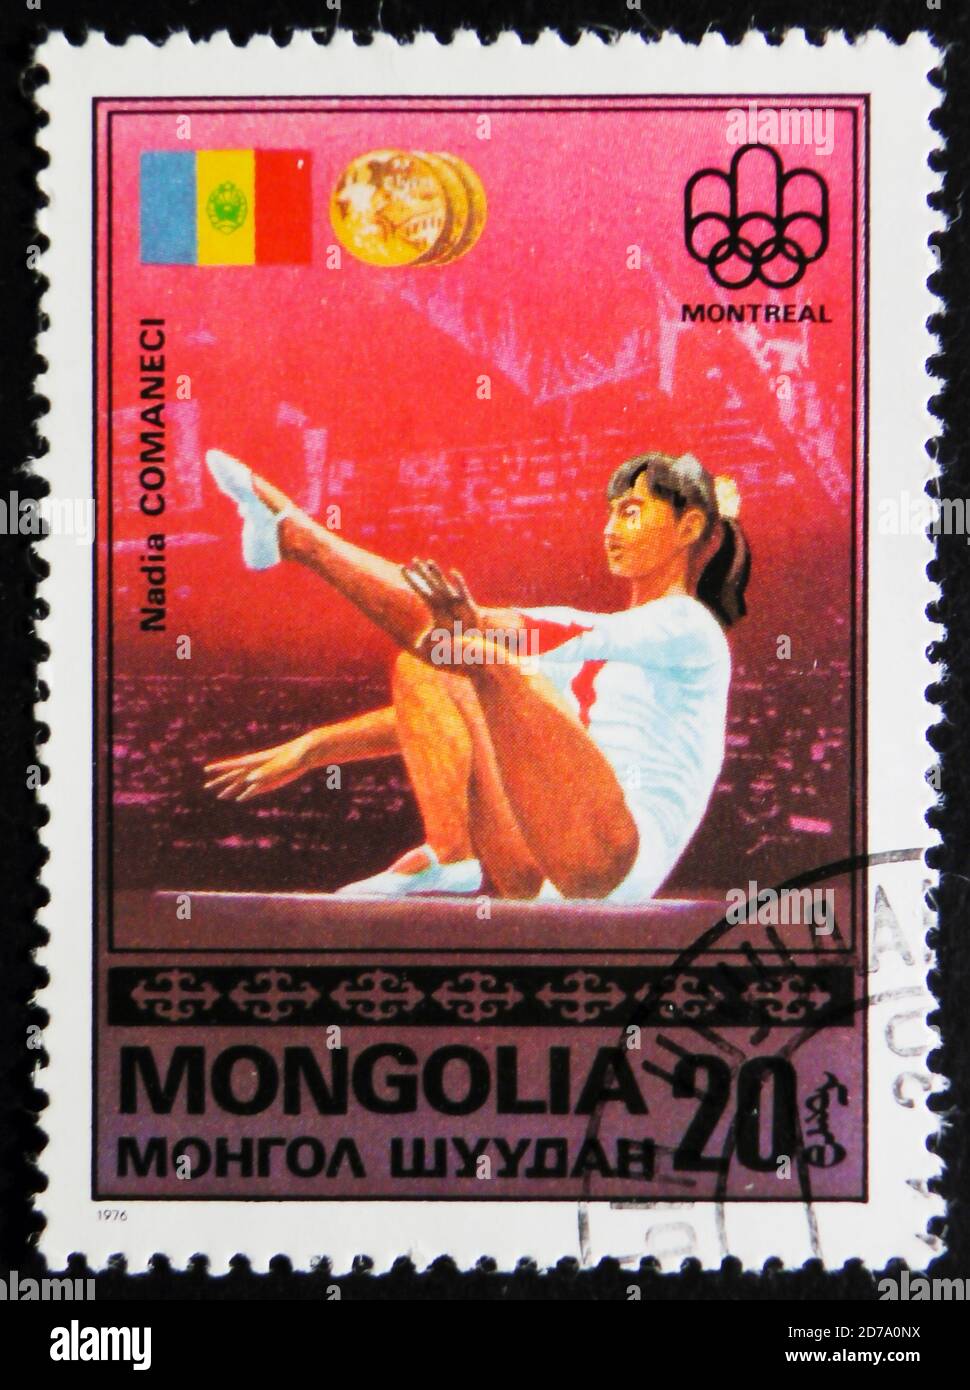 MOSCOW, RUSSIA - APRIL 2, 2017: A post stamp printed in Mongolia, shows Nadia Comaneci, from series 'Olympic Games, Montreal - Gold Medal Winners', ci Stock Photo